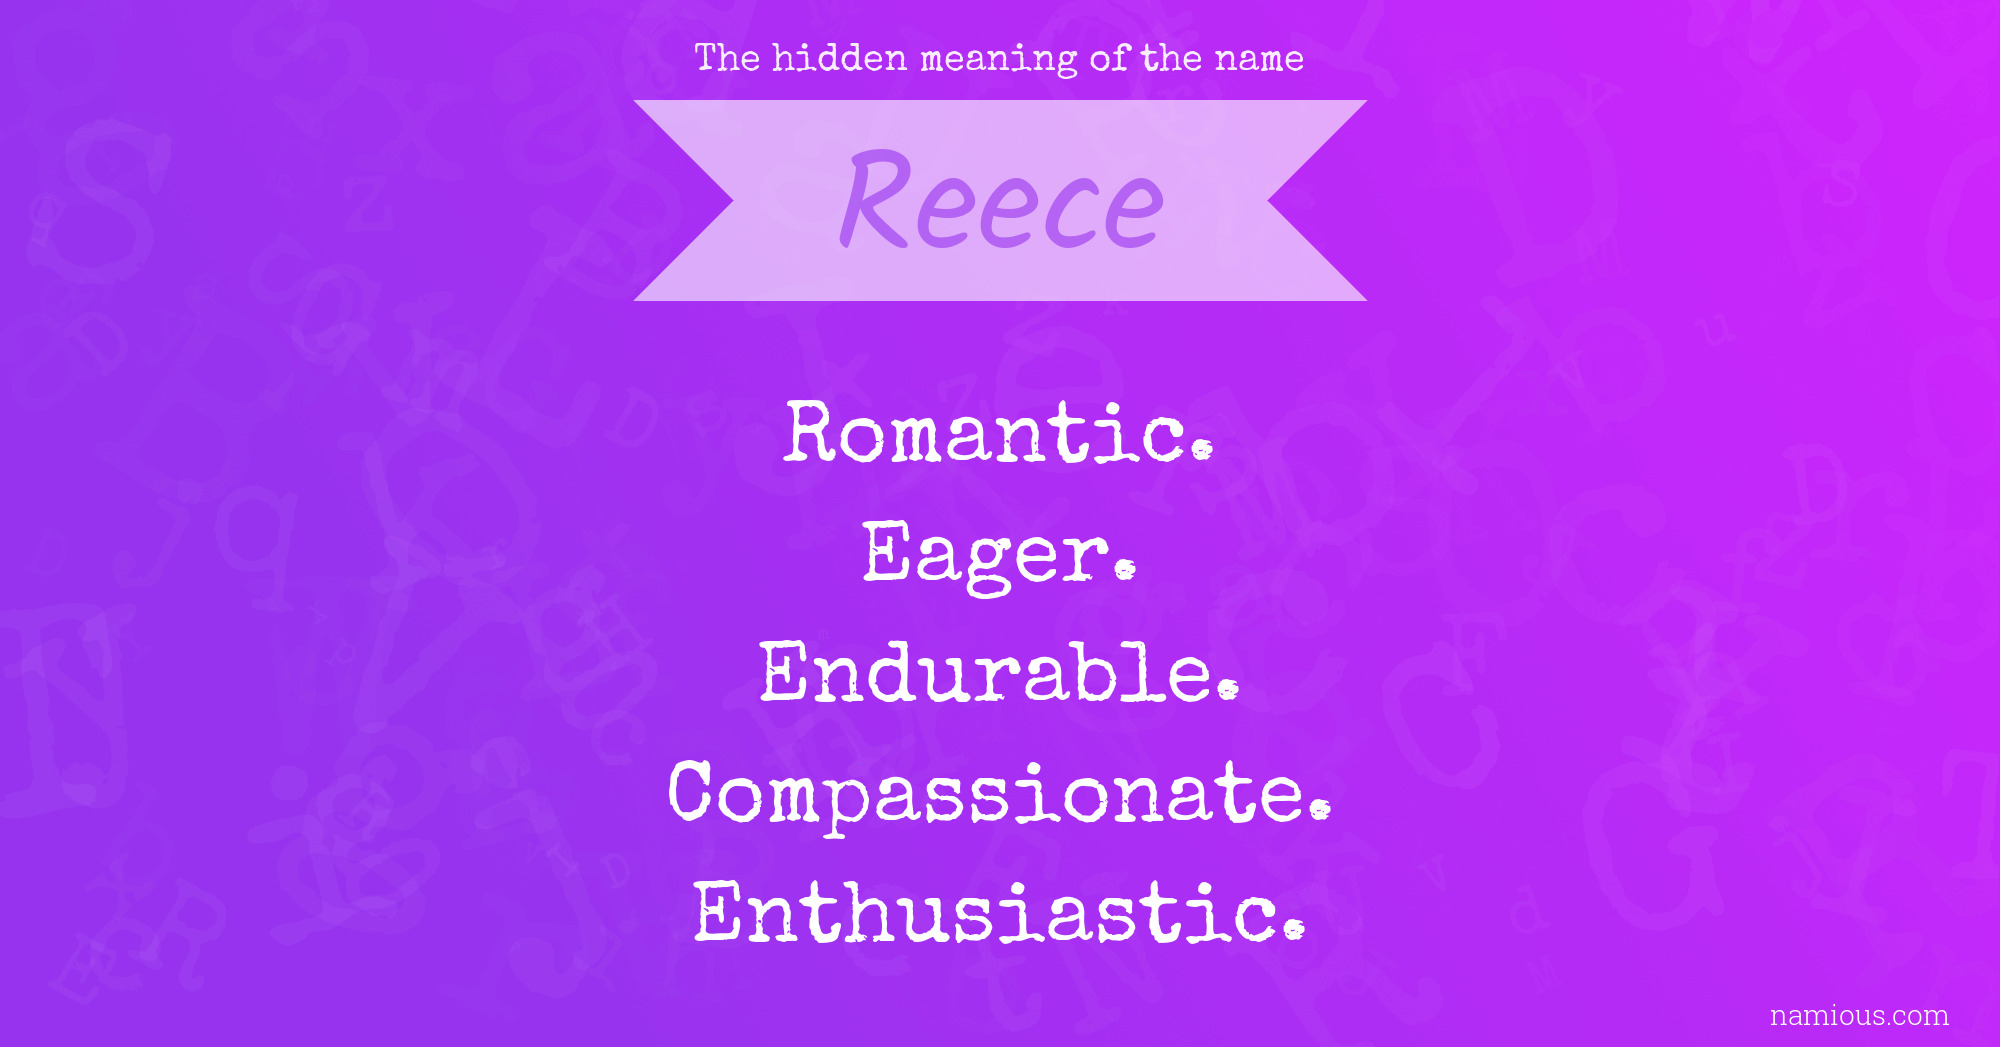 The hidden meaning of the name Reece